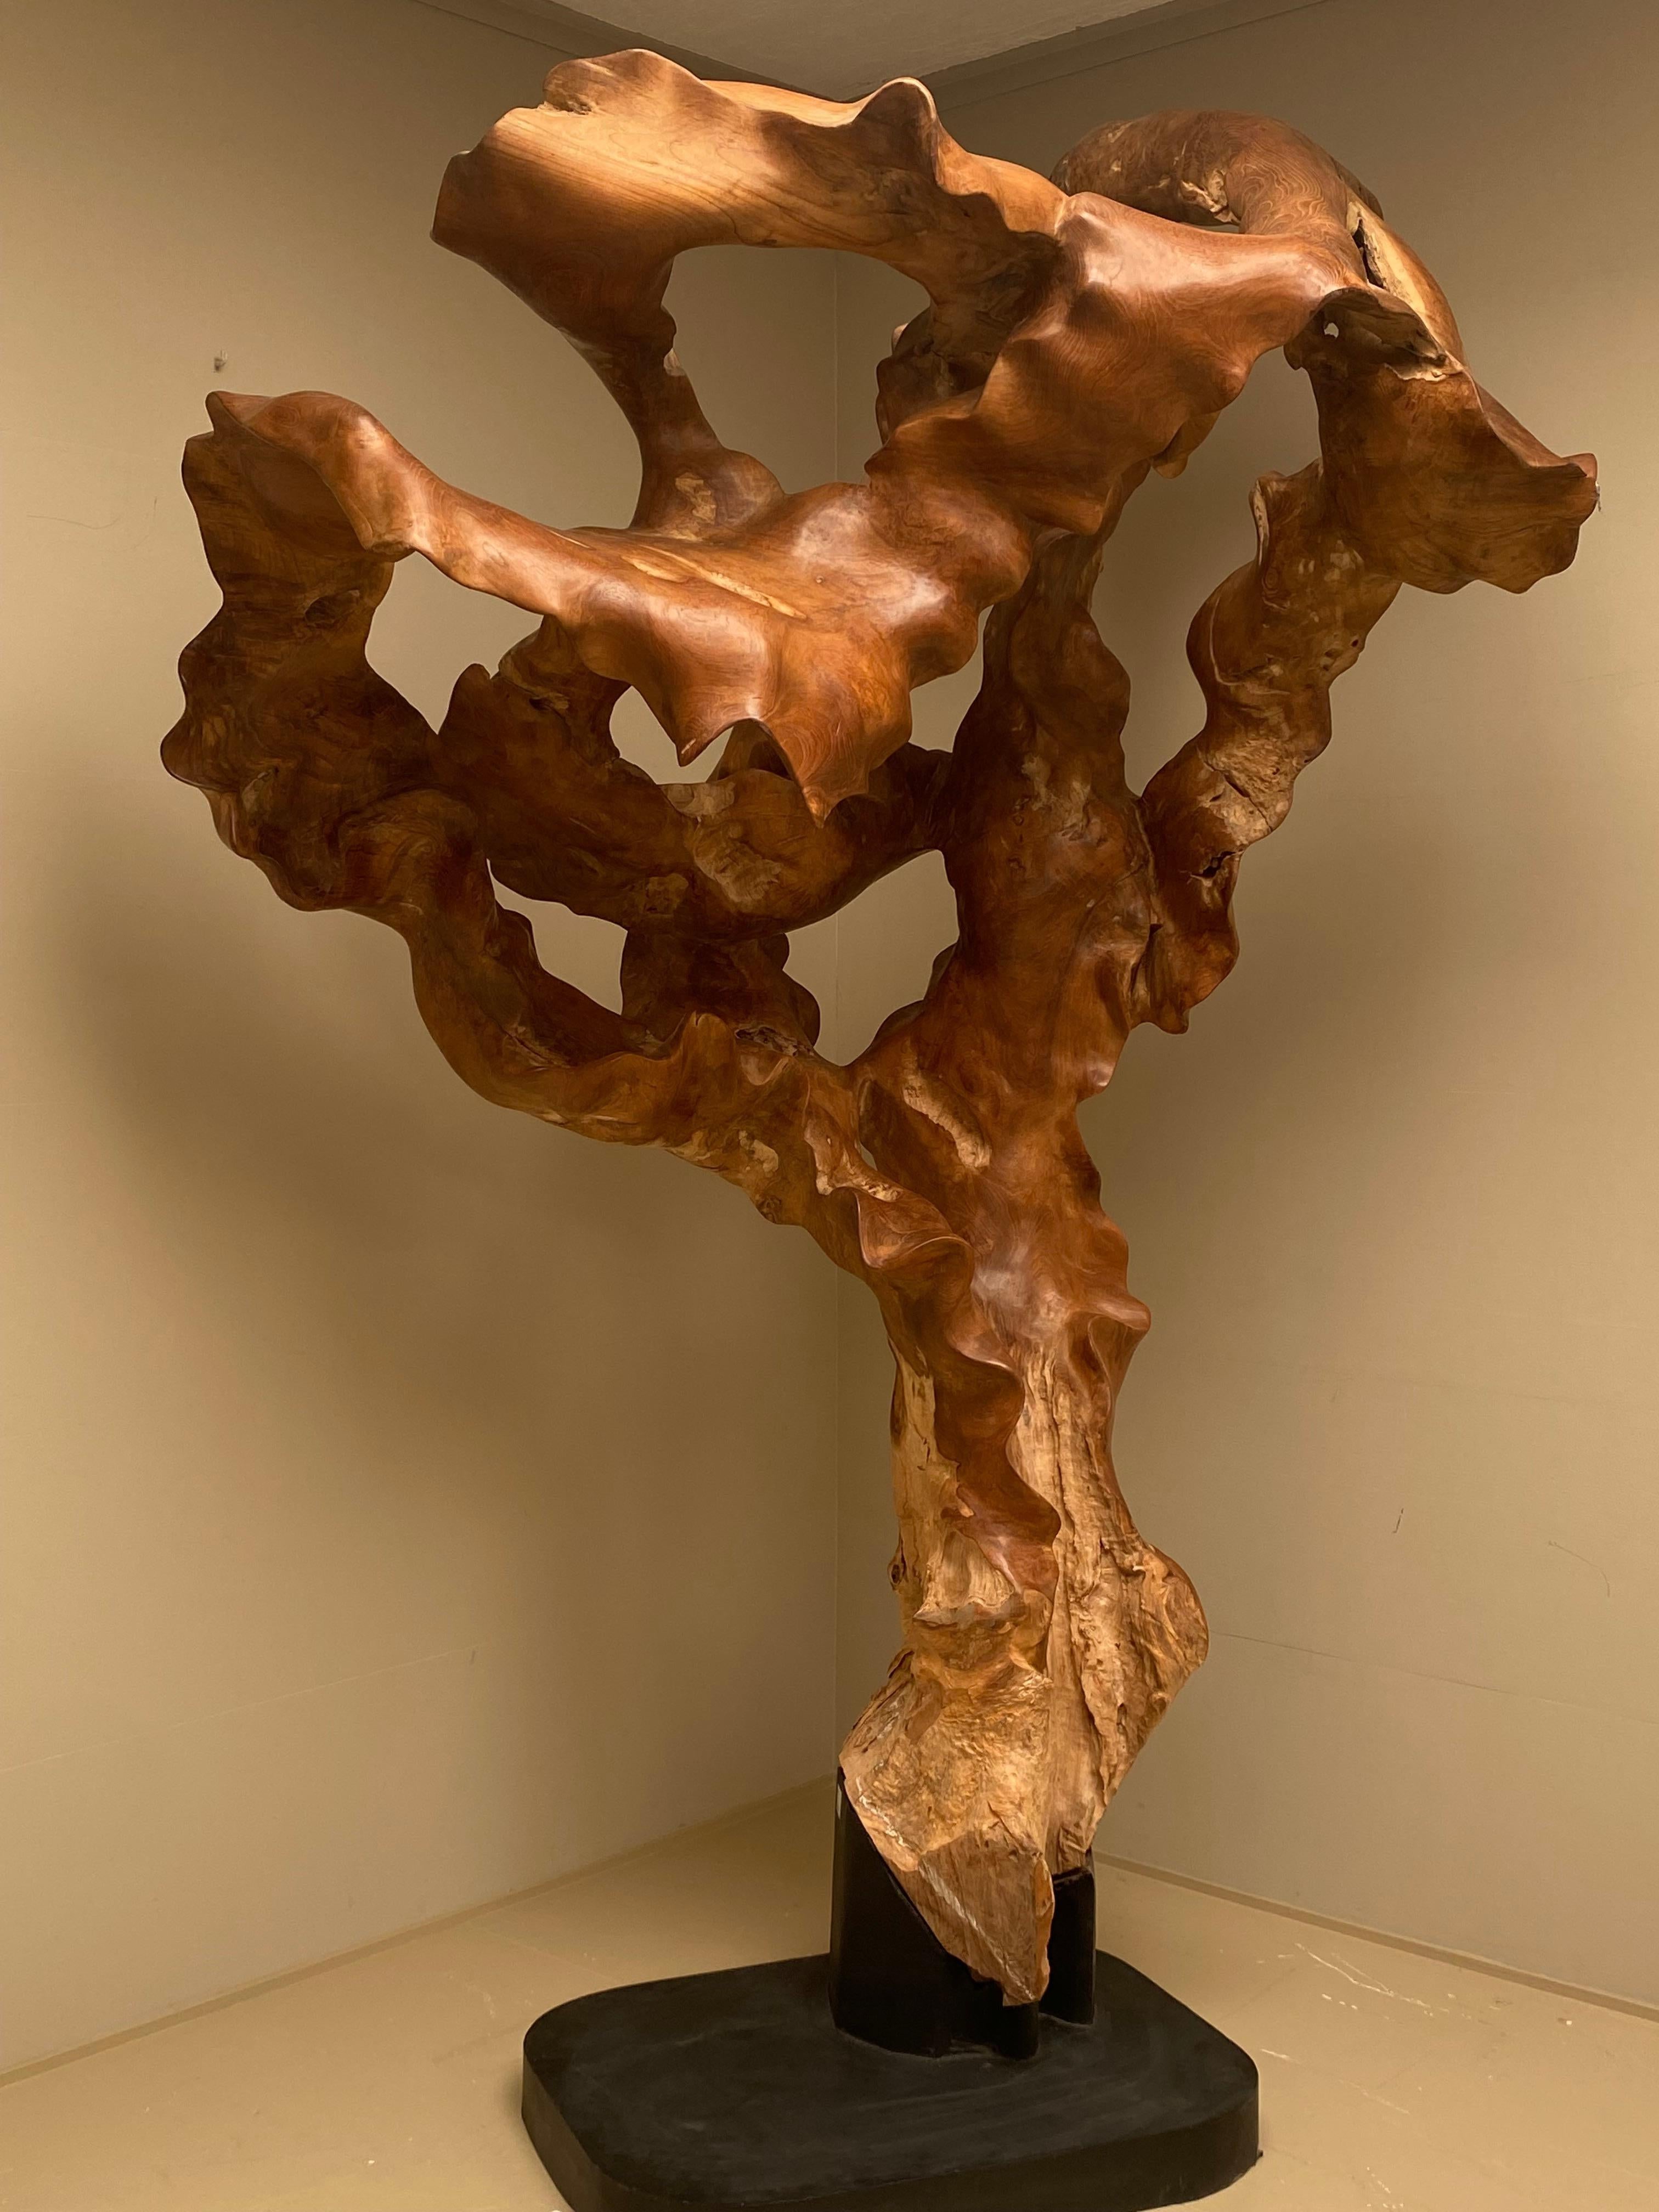 Polished Big Scale Abstract Sculpture, Tree Root in Teak Wood. 